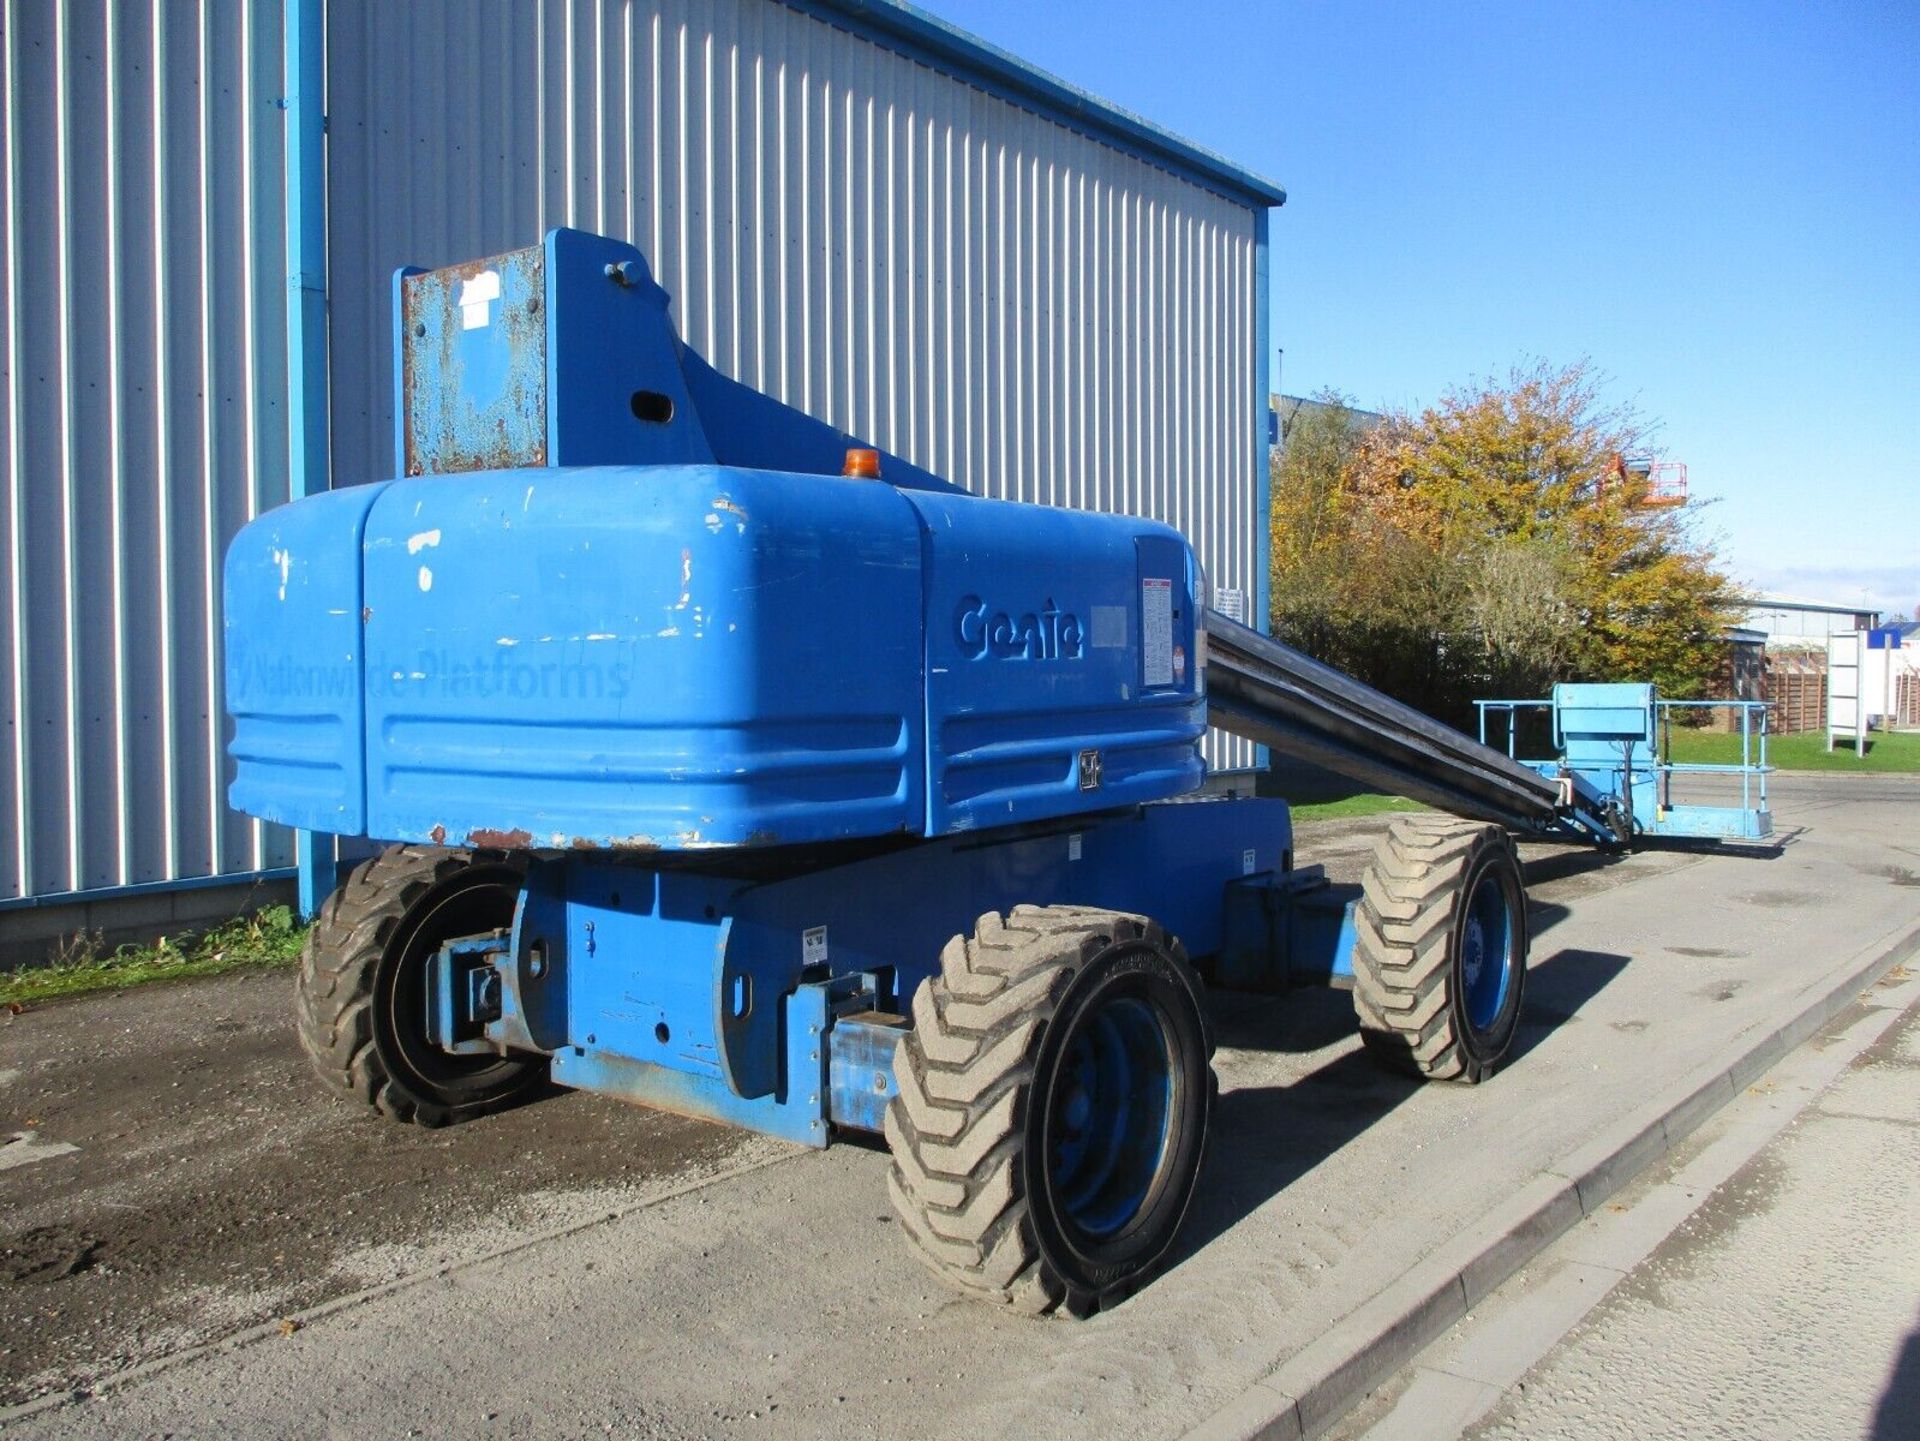 GENIE S85: SOARING HEIGHTS WITH 27.9M CHERRY PICKER